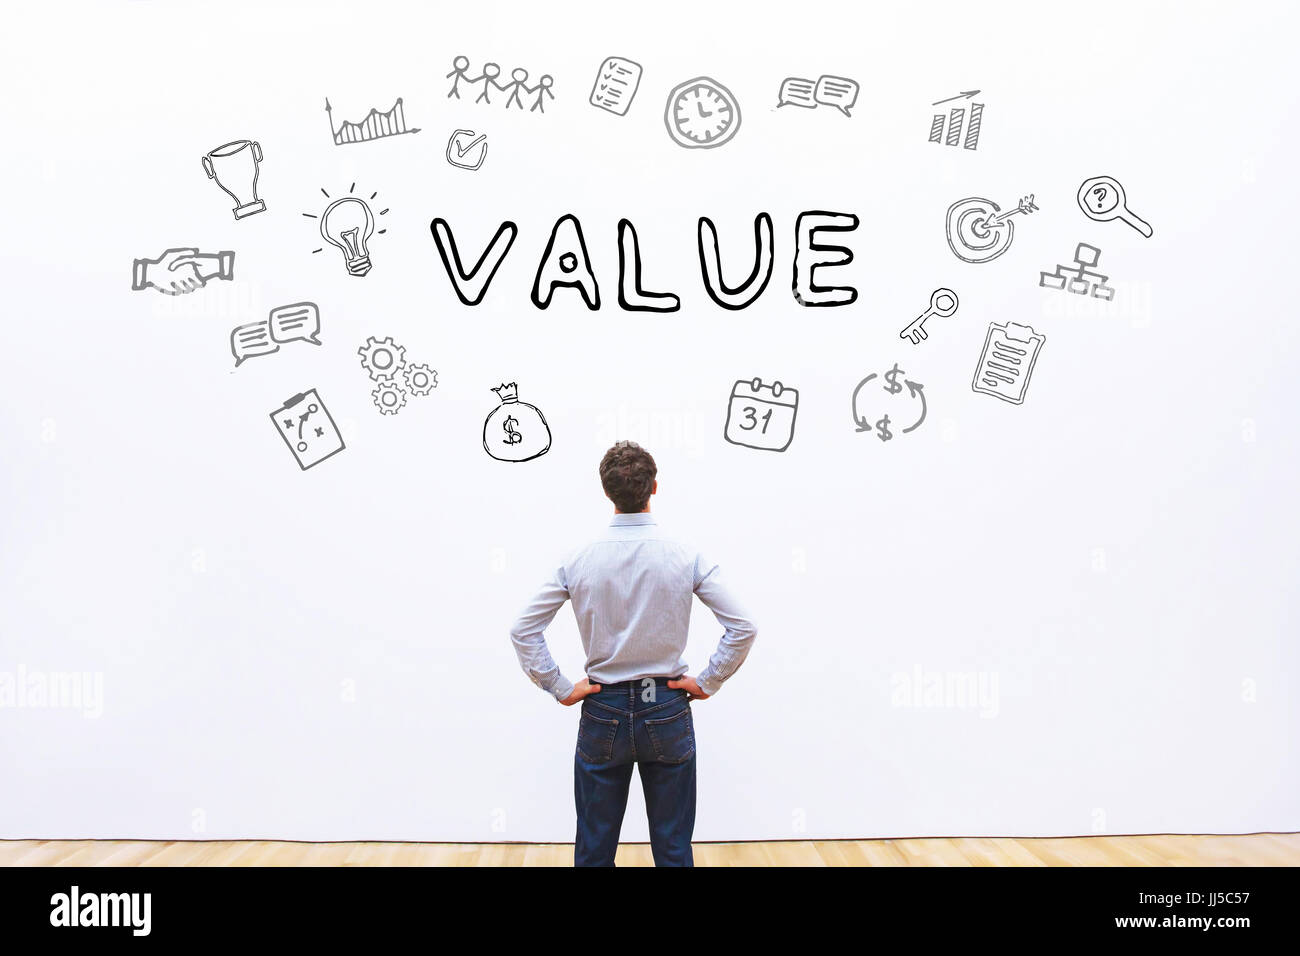 value business concept Stock Photo